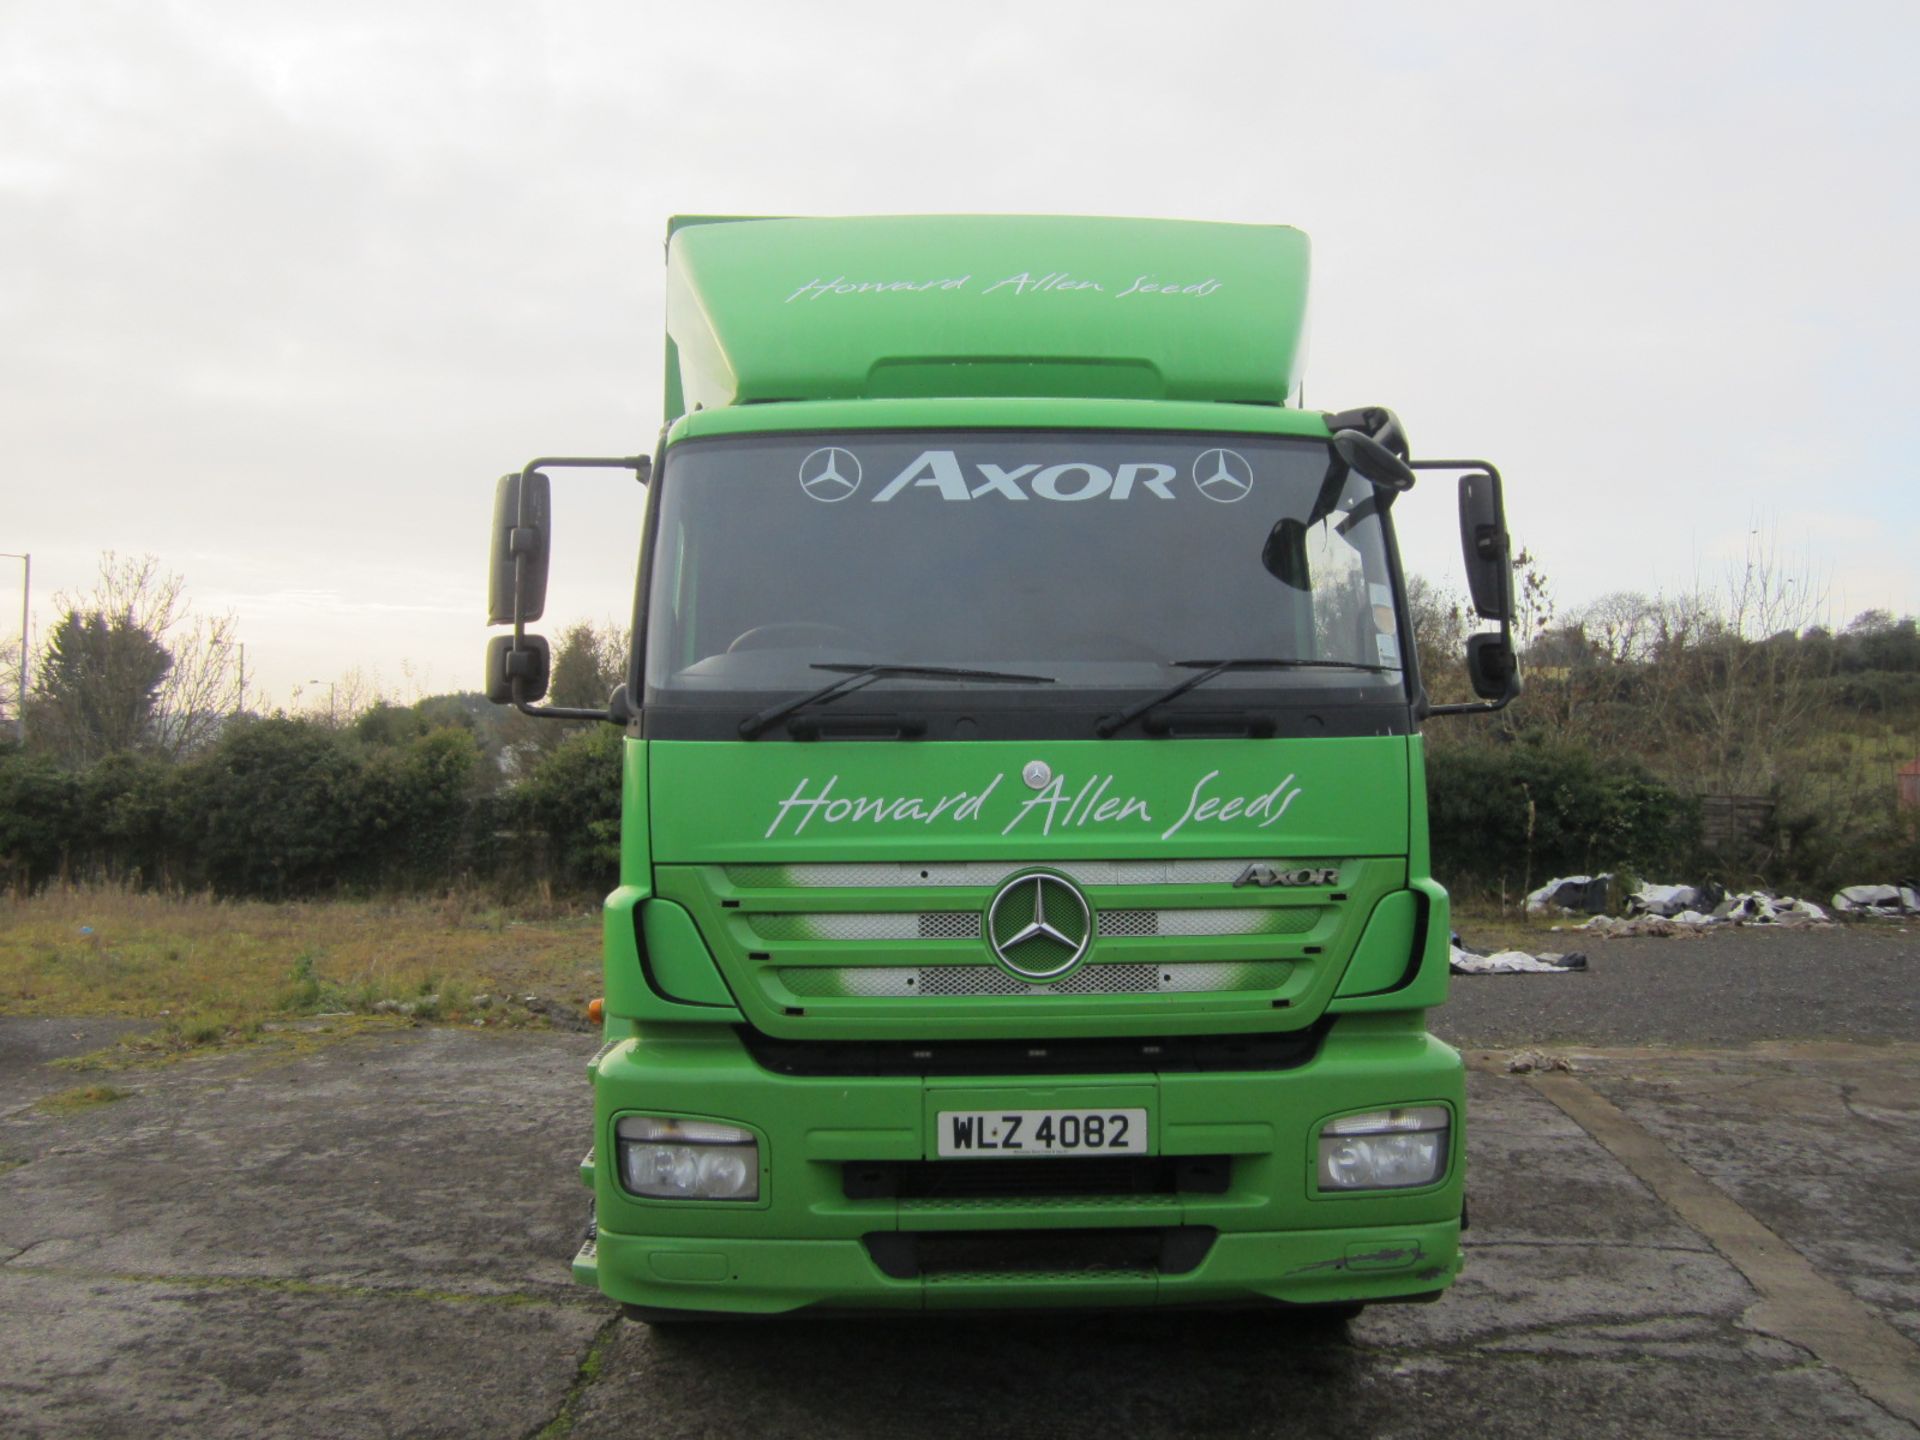 2008 Mercedes Axor 6x2 Curtain Sider, Rear Lift Axle, 26t Gross, 463kms, WLZ 4082 - Image 2 of 10